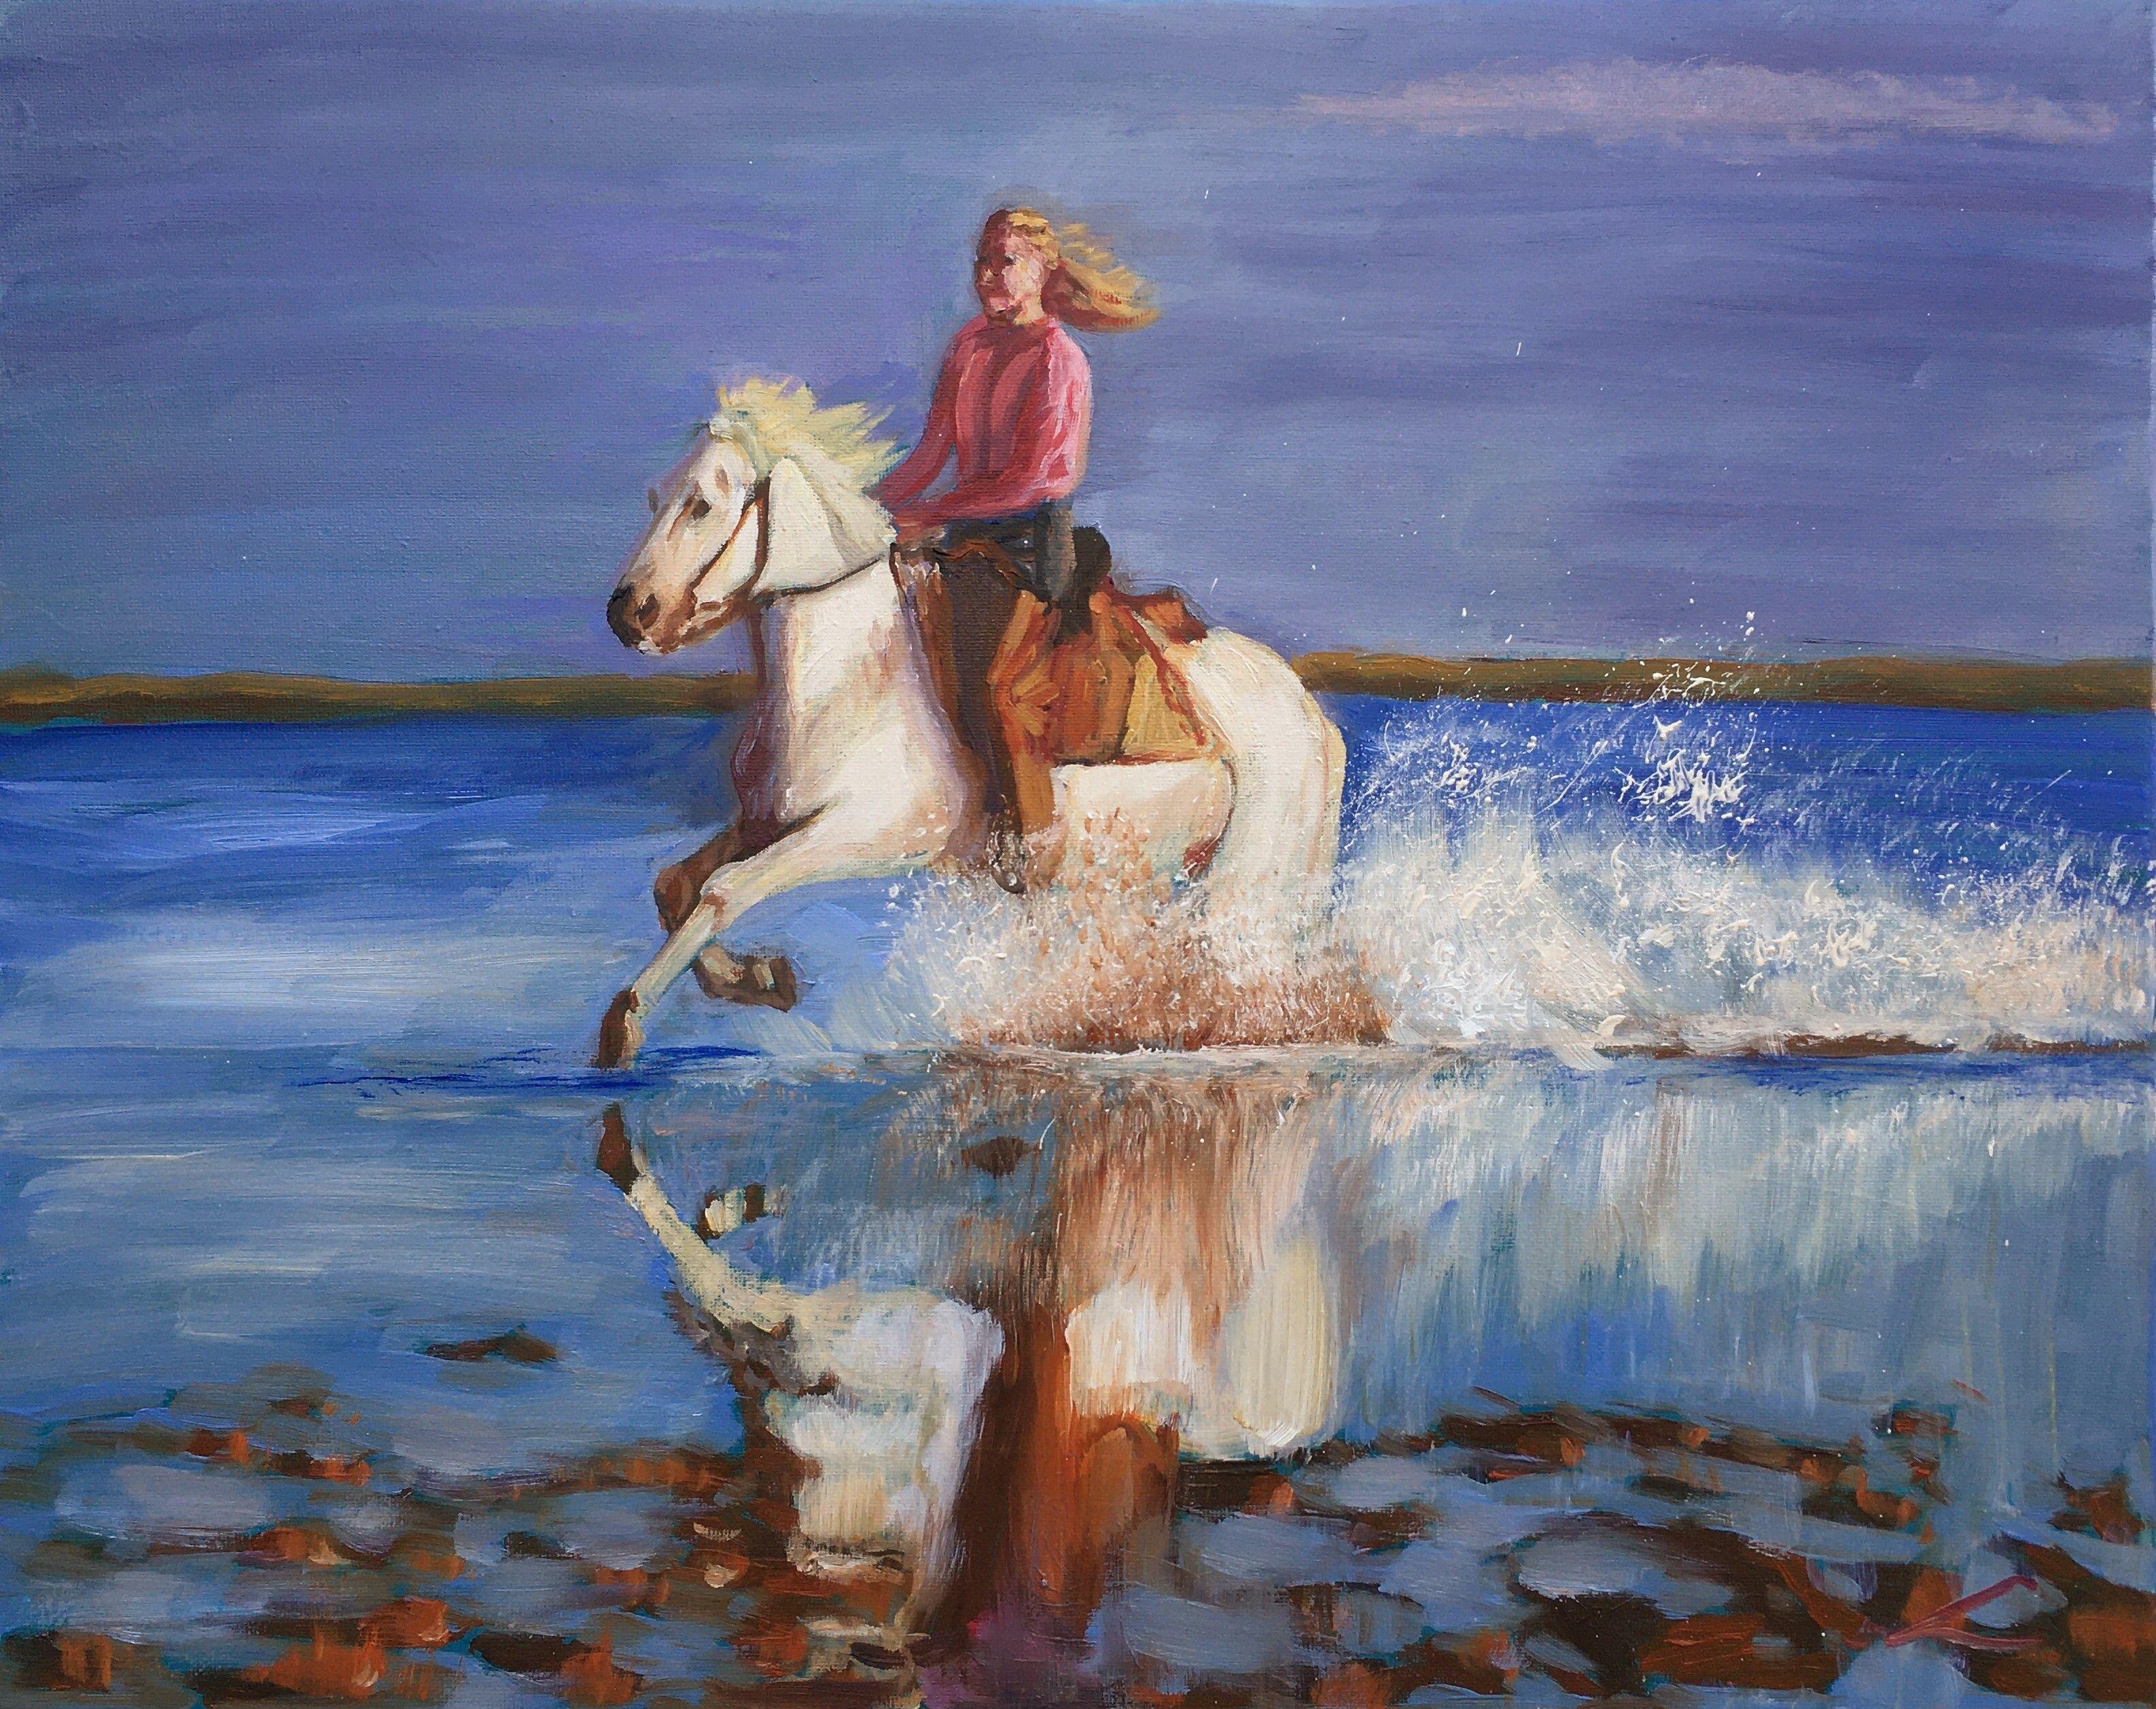 Horse riding girl at the sea. Alla prima oil painting with few final tuch when dry.A place that is peaceful in its own ways. It is the place to go to get away from all my troubles.  :: Painting :: Impressionist :: This piece comes with an official